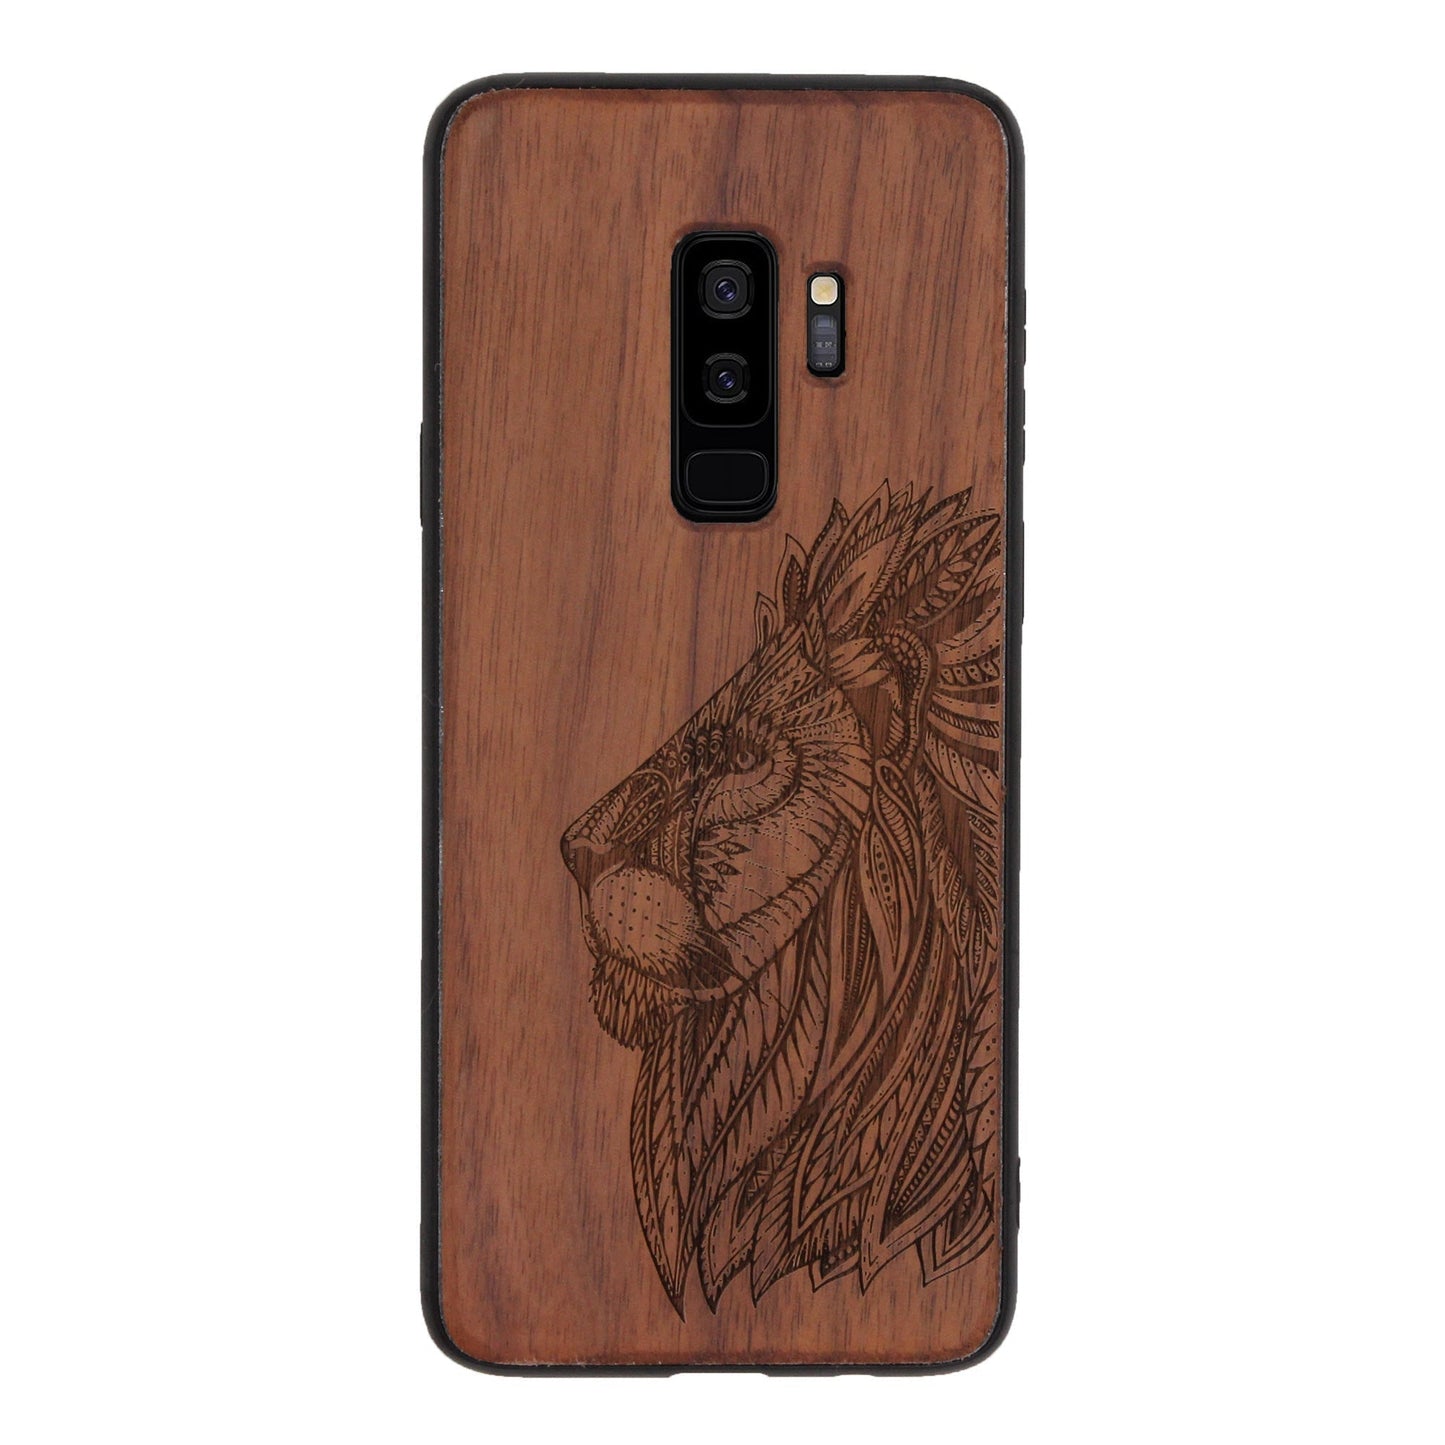 Eden Lion case made of cherry wood for Samsung Galaxy S9 Plus